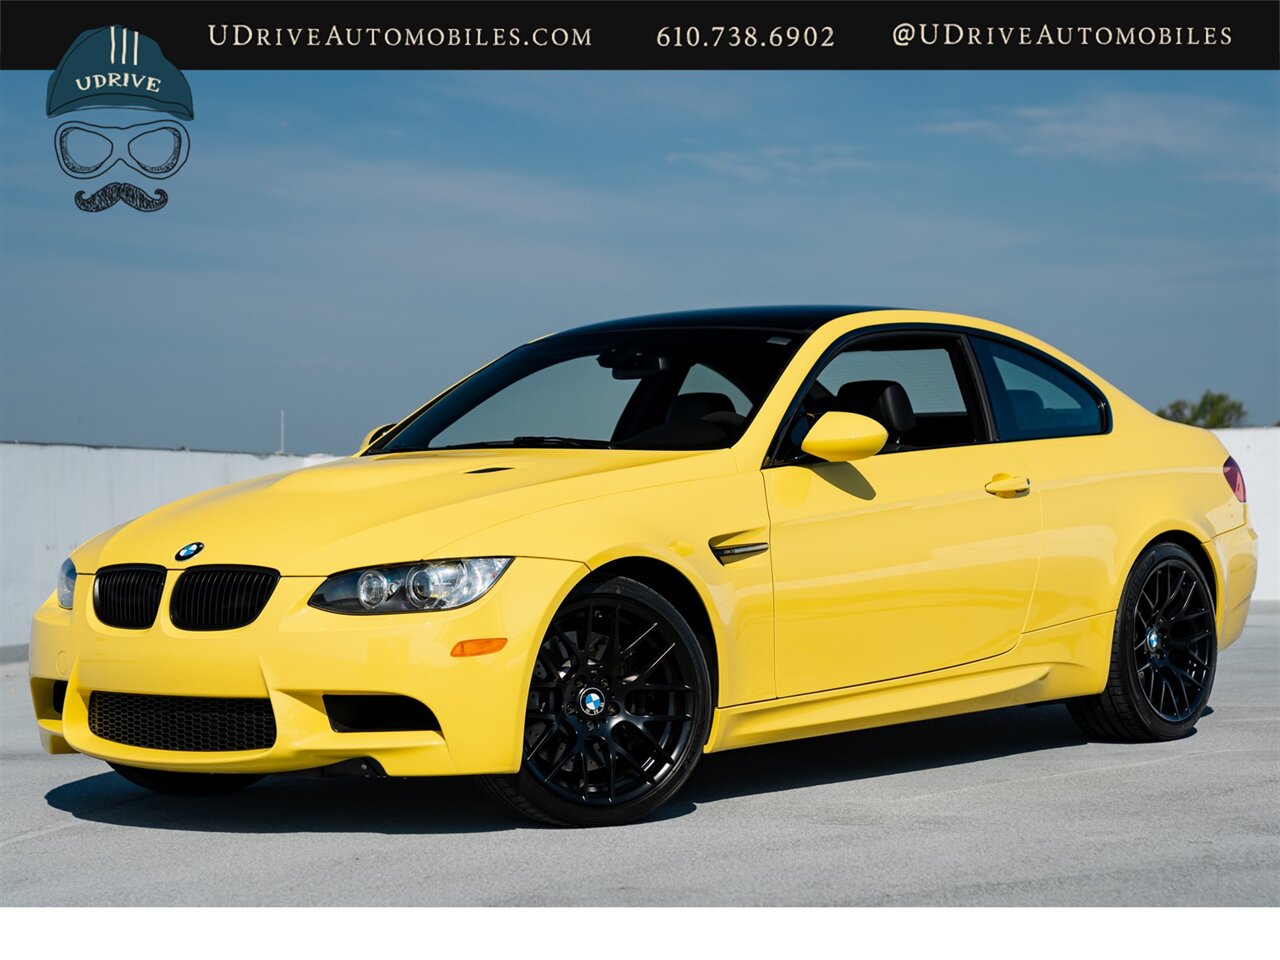 2010 BMW M3  E92 6 Sp Individual Dakar Cloth Seats Carbon Roof No NAV Rod Bearings Replaced - Photo 1 - West Chester, PA 19382